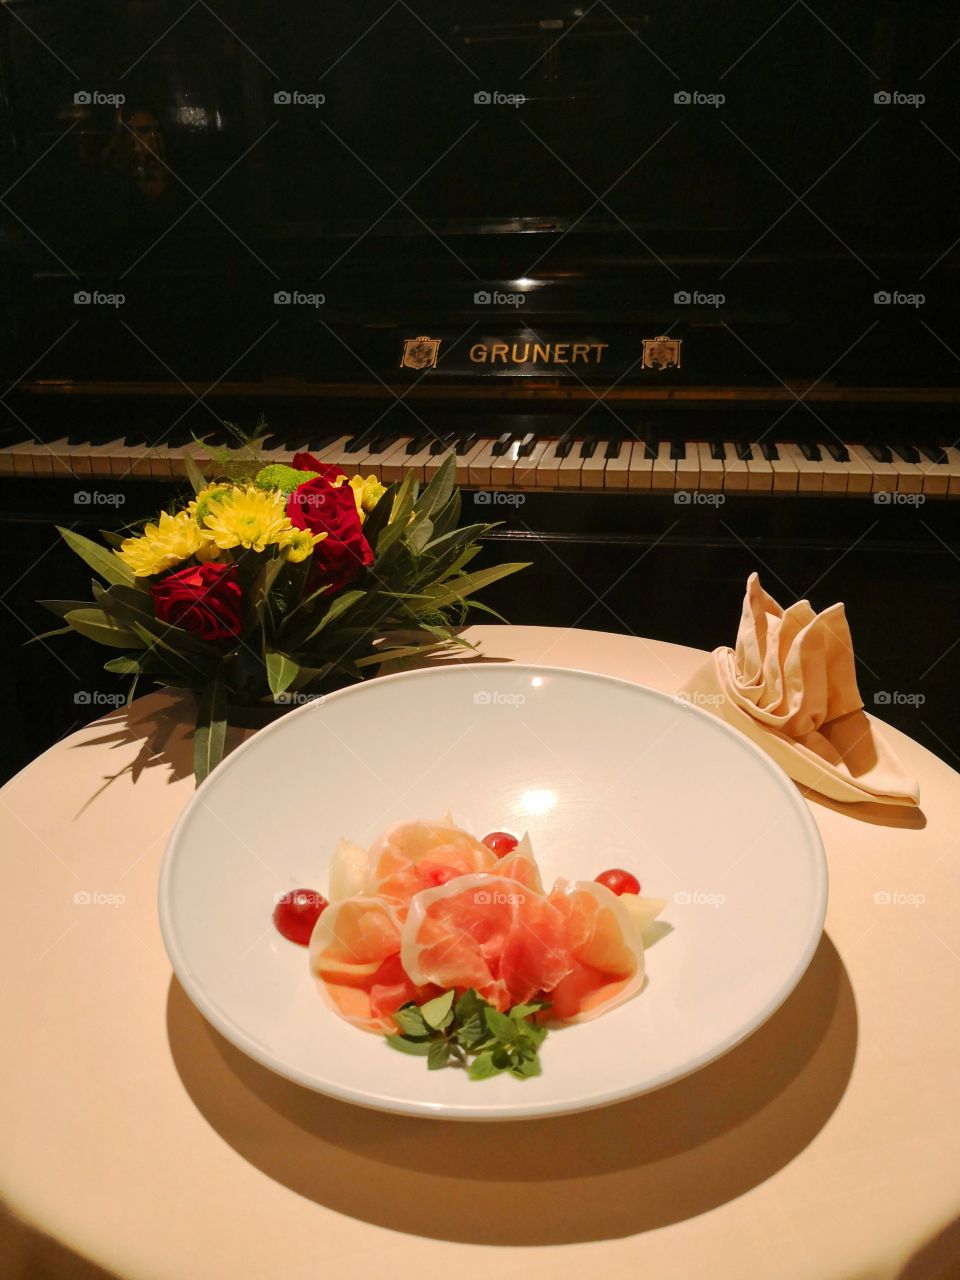 Prsut Melone with flower and piano in the background.